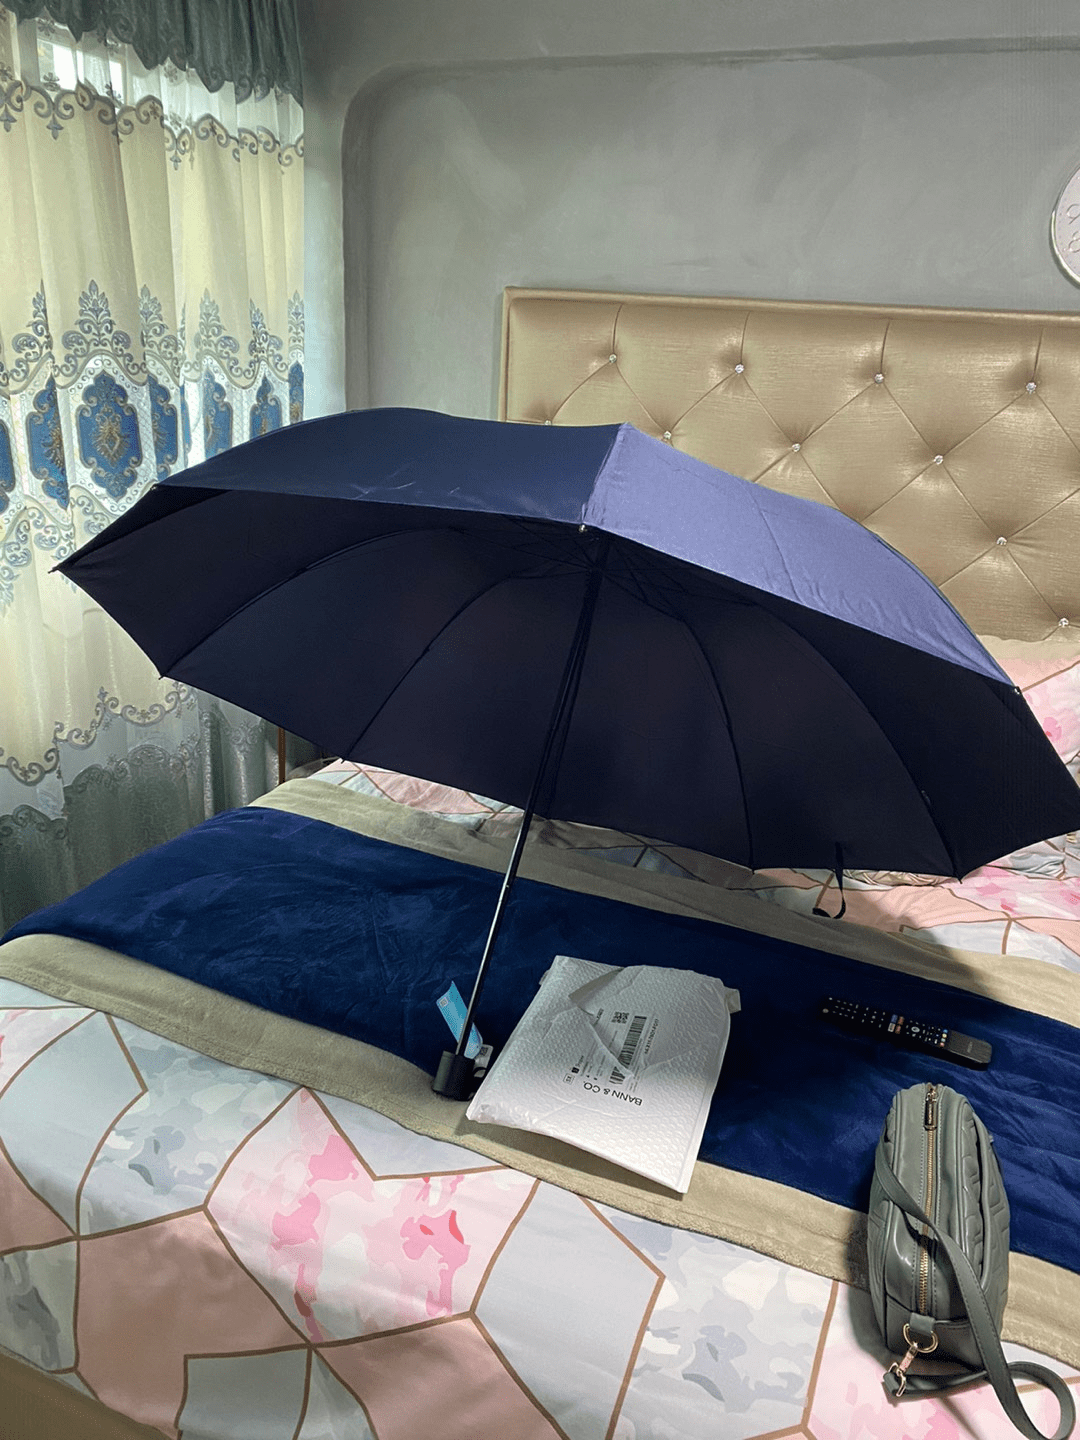 foldable umbrellas - bann and co. extra large